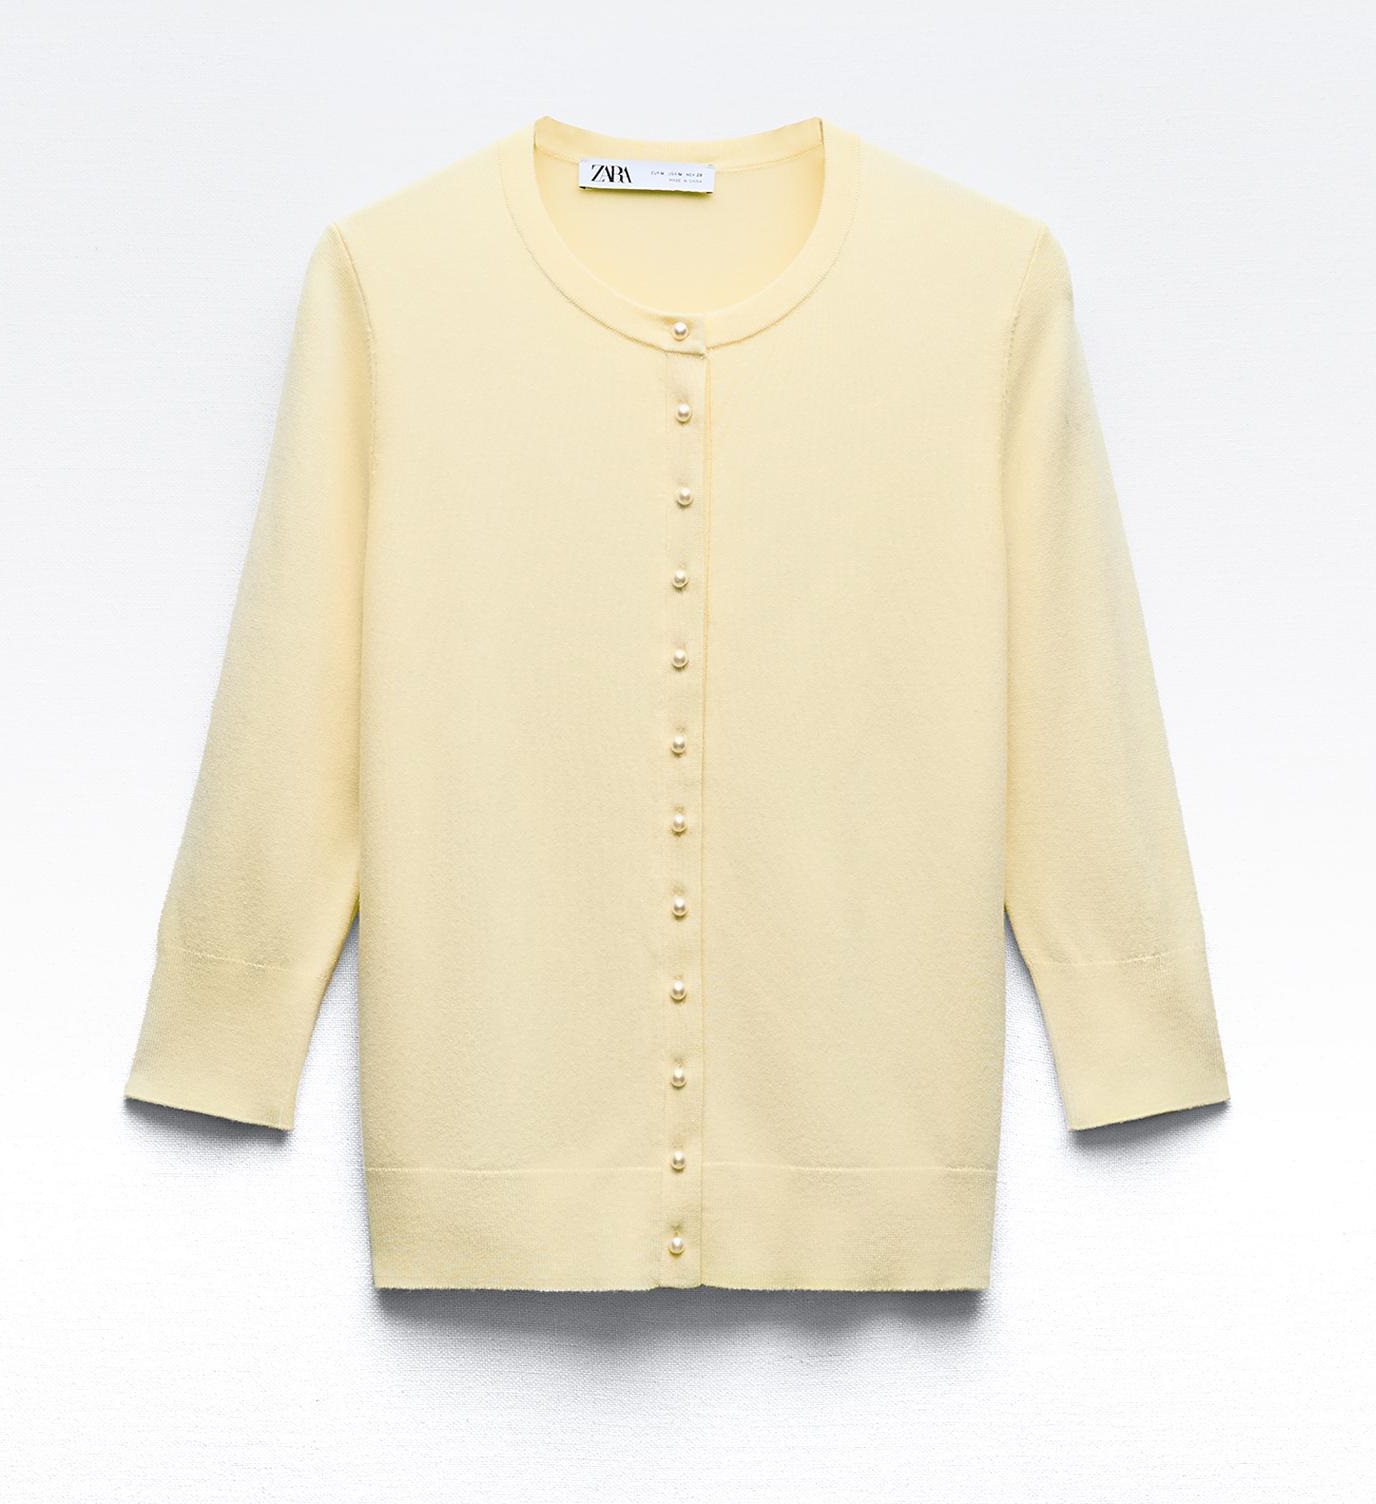 Кардиган Zara Plain Knit With Faux Pearl Buttons, светло-желтый кардиган zara plain knit красно коричневый